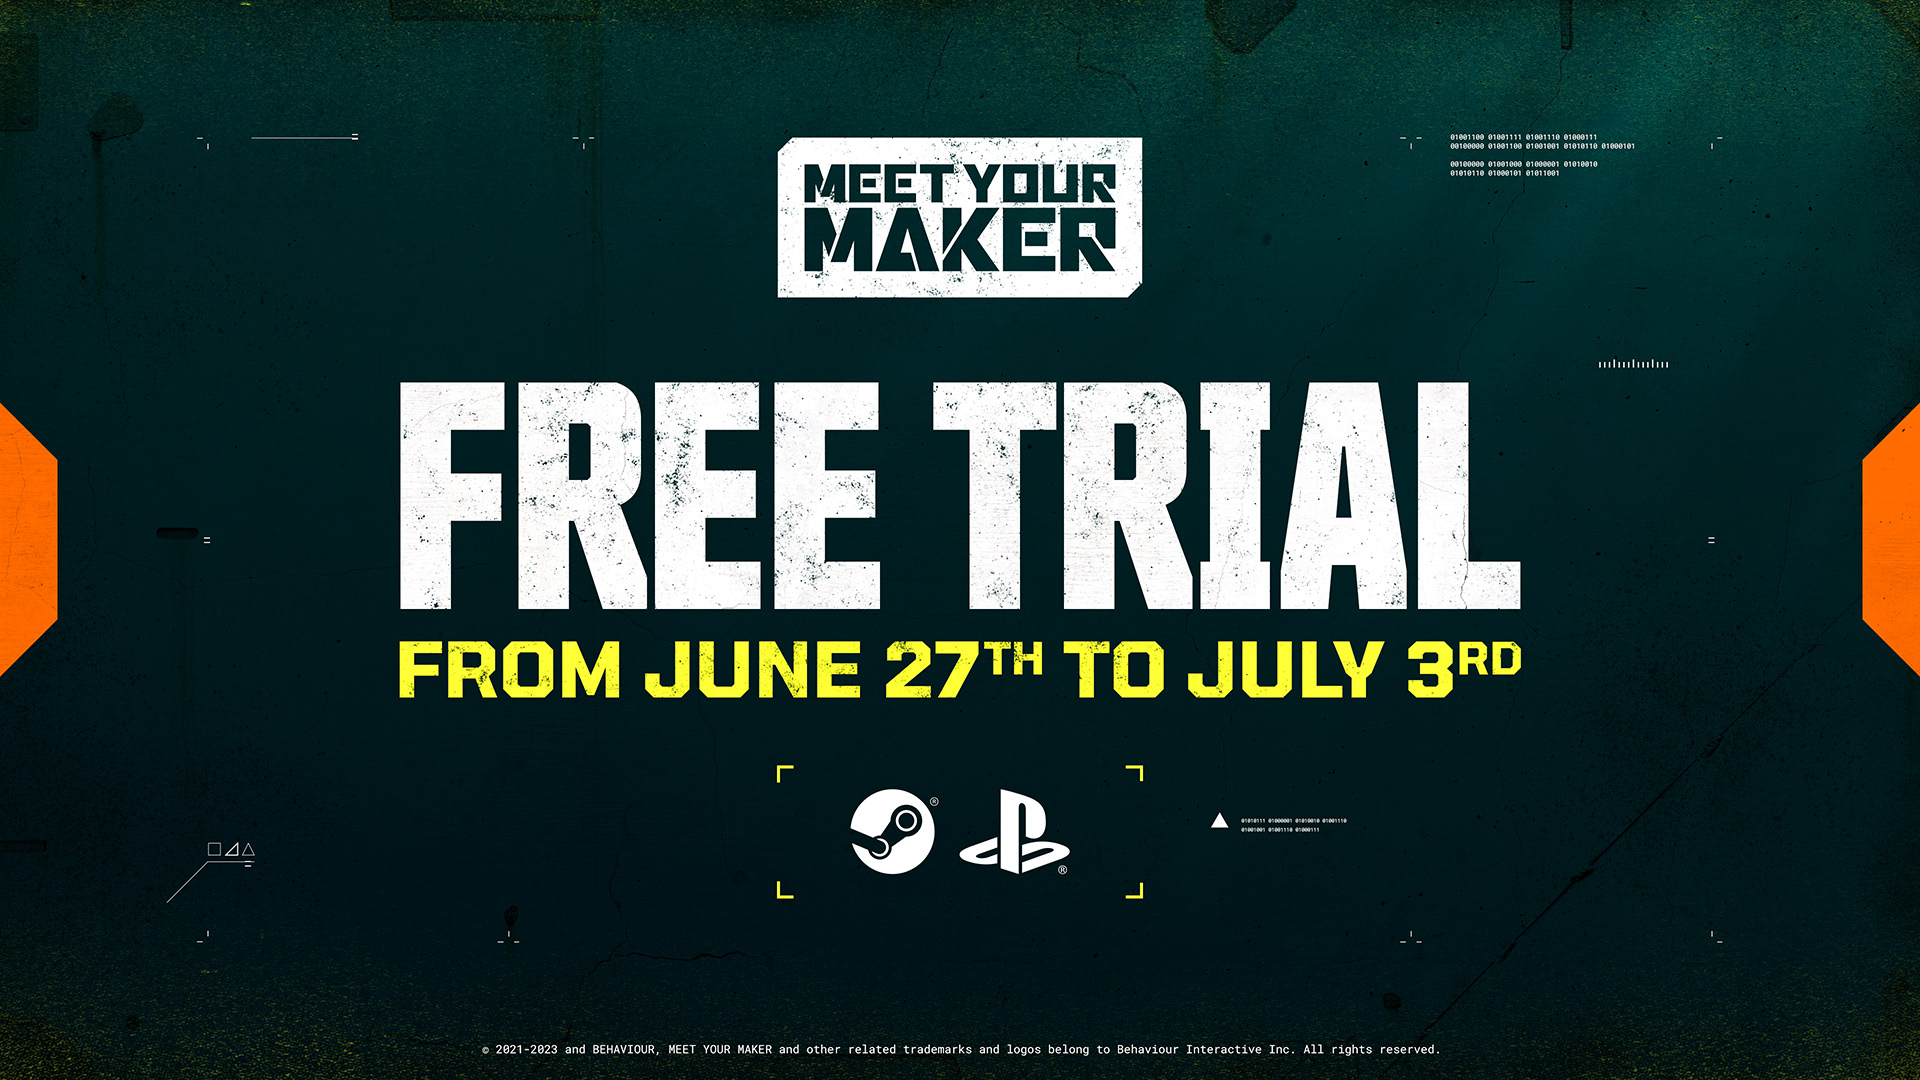 You can play Meet Your Maker free from now until July 3